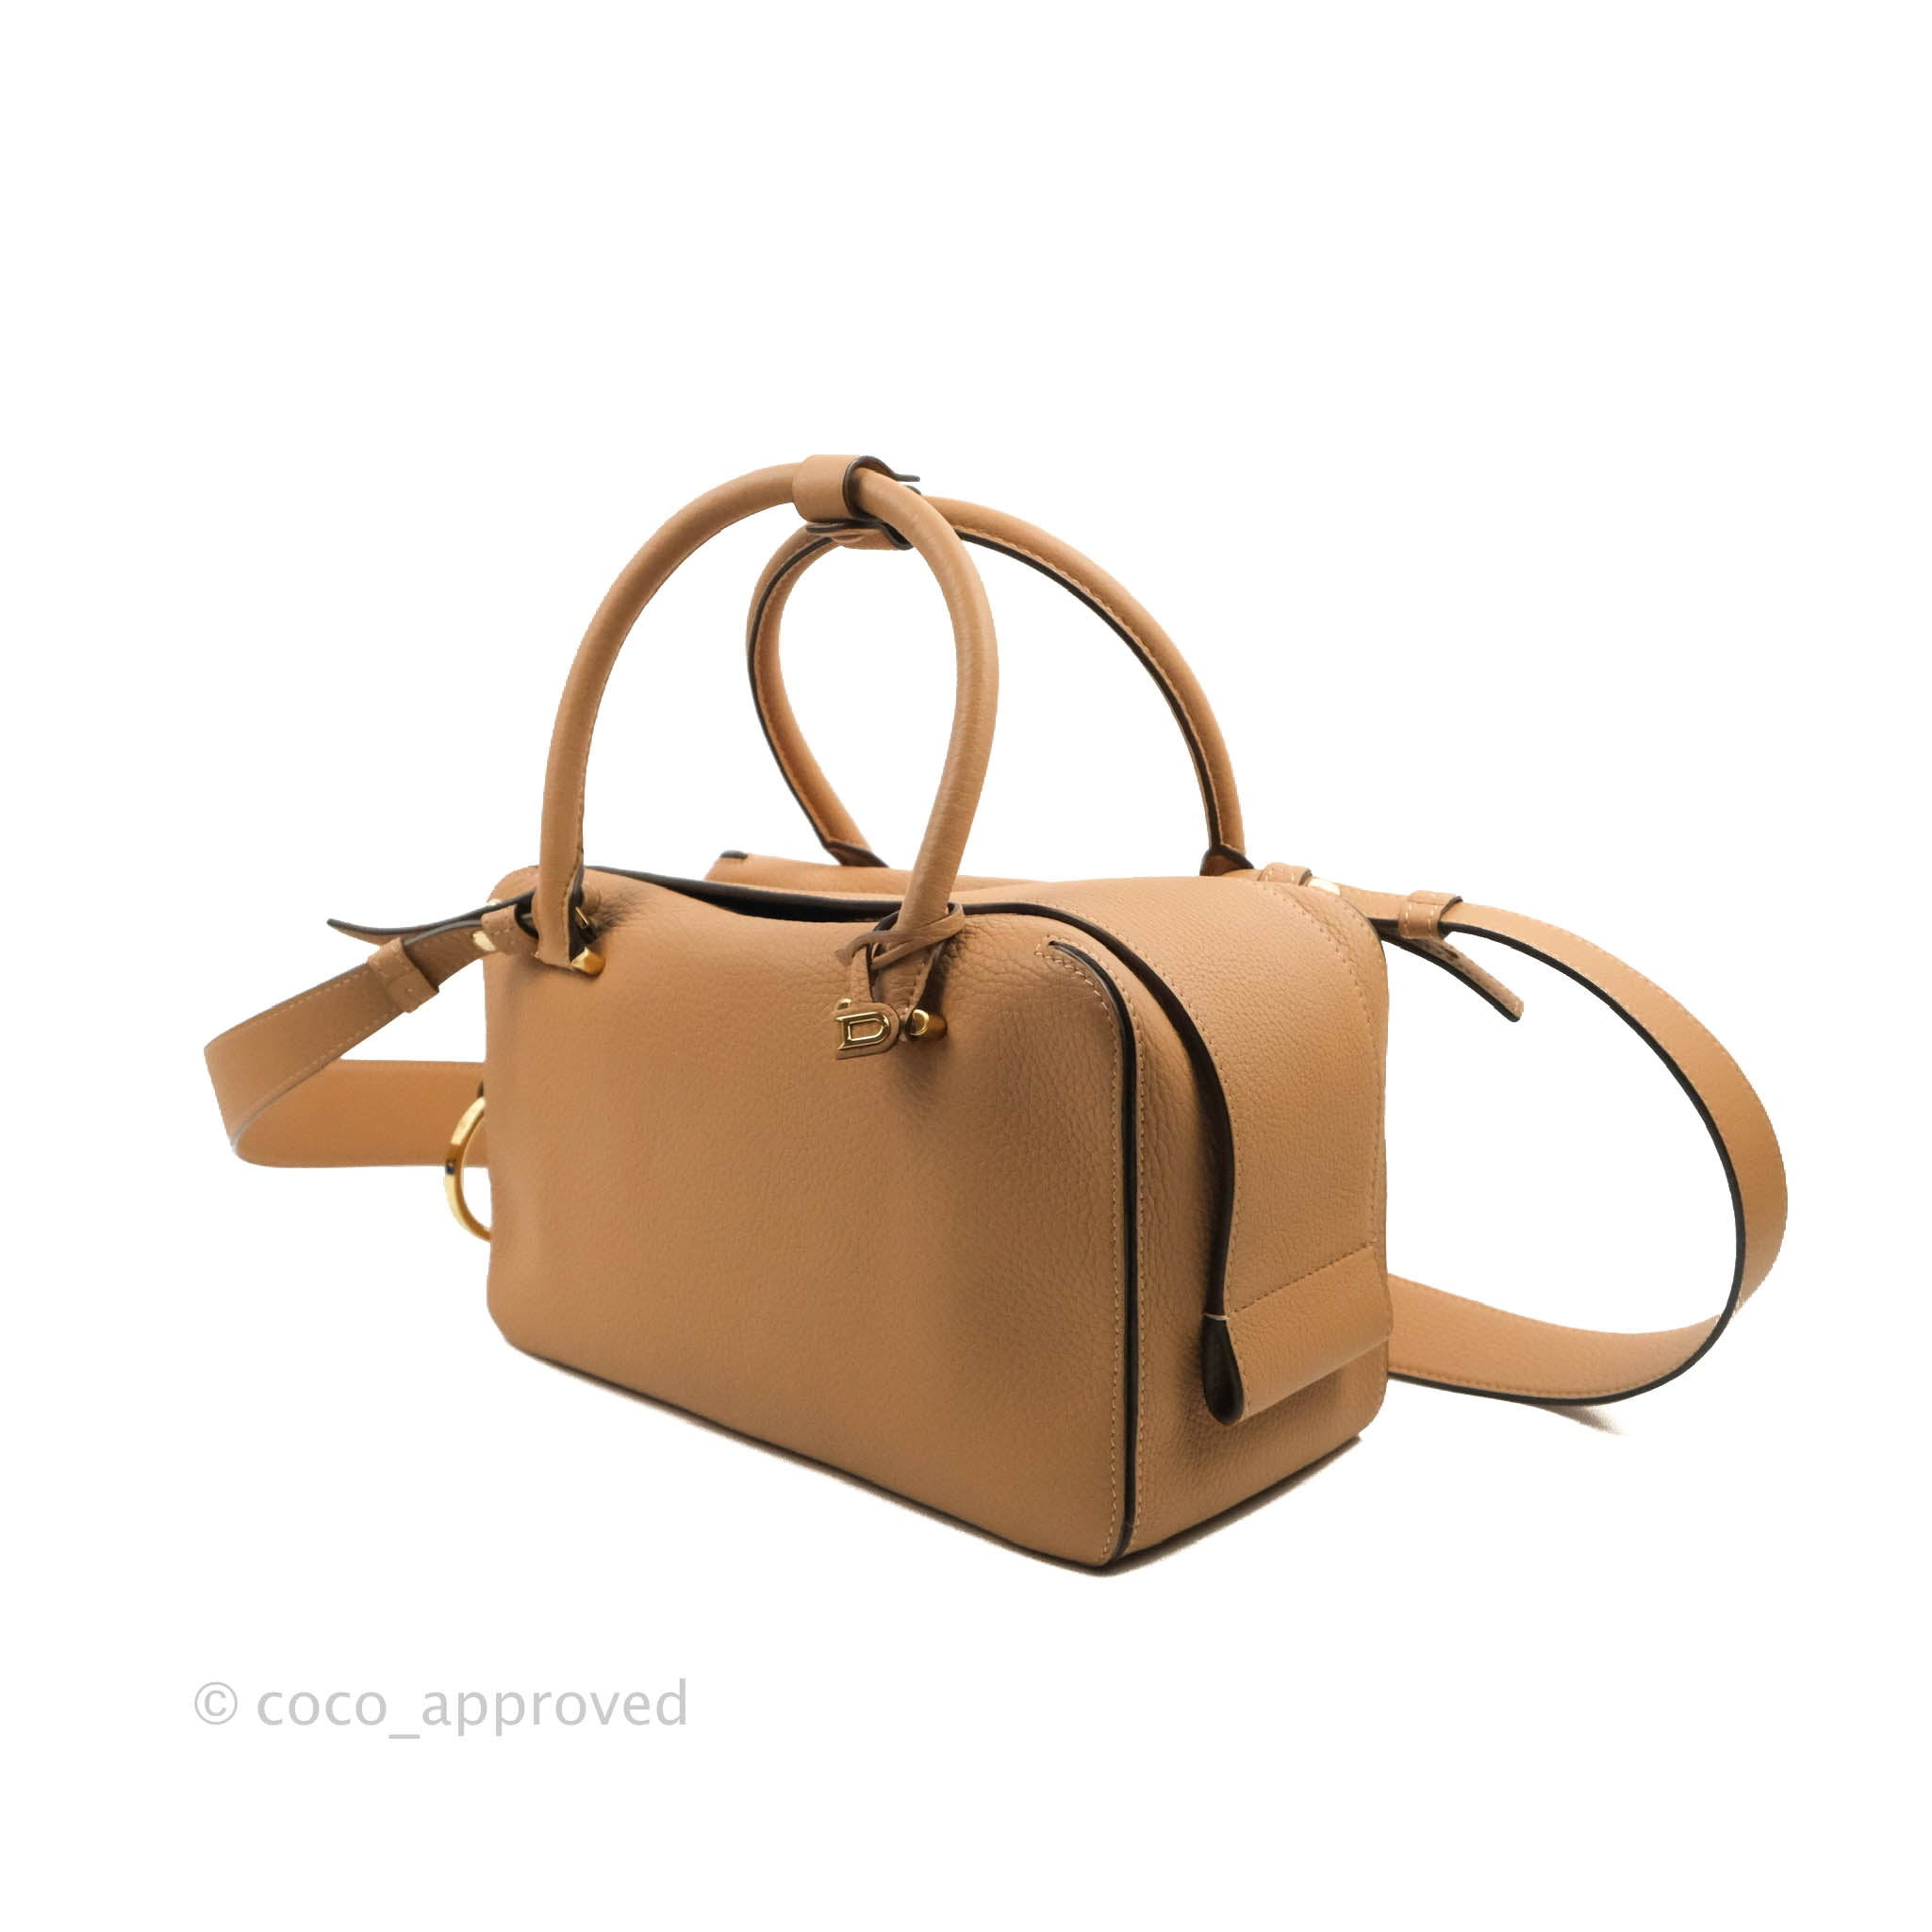 Delvaux 'cool Box Mm' Leather Bag in Brown